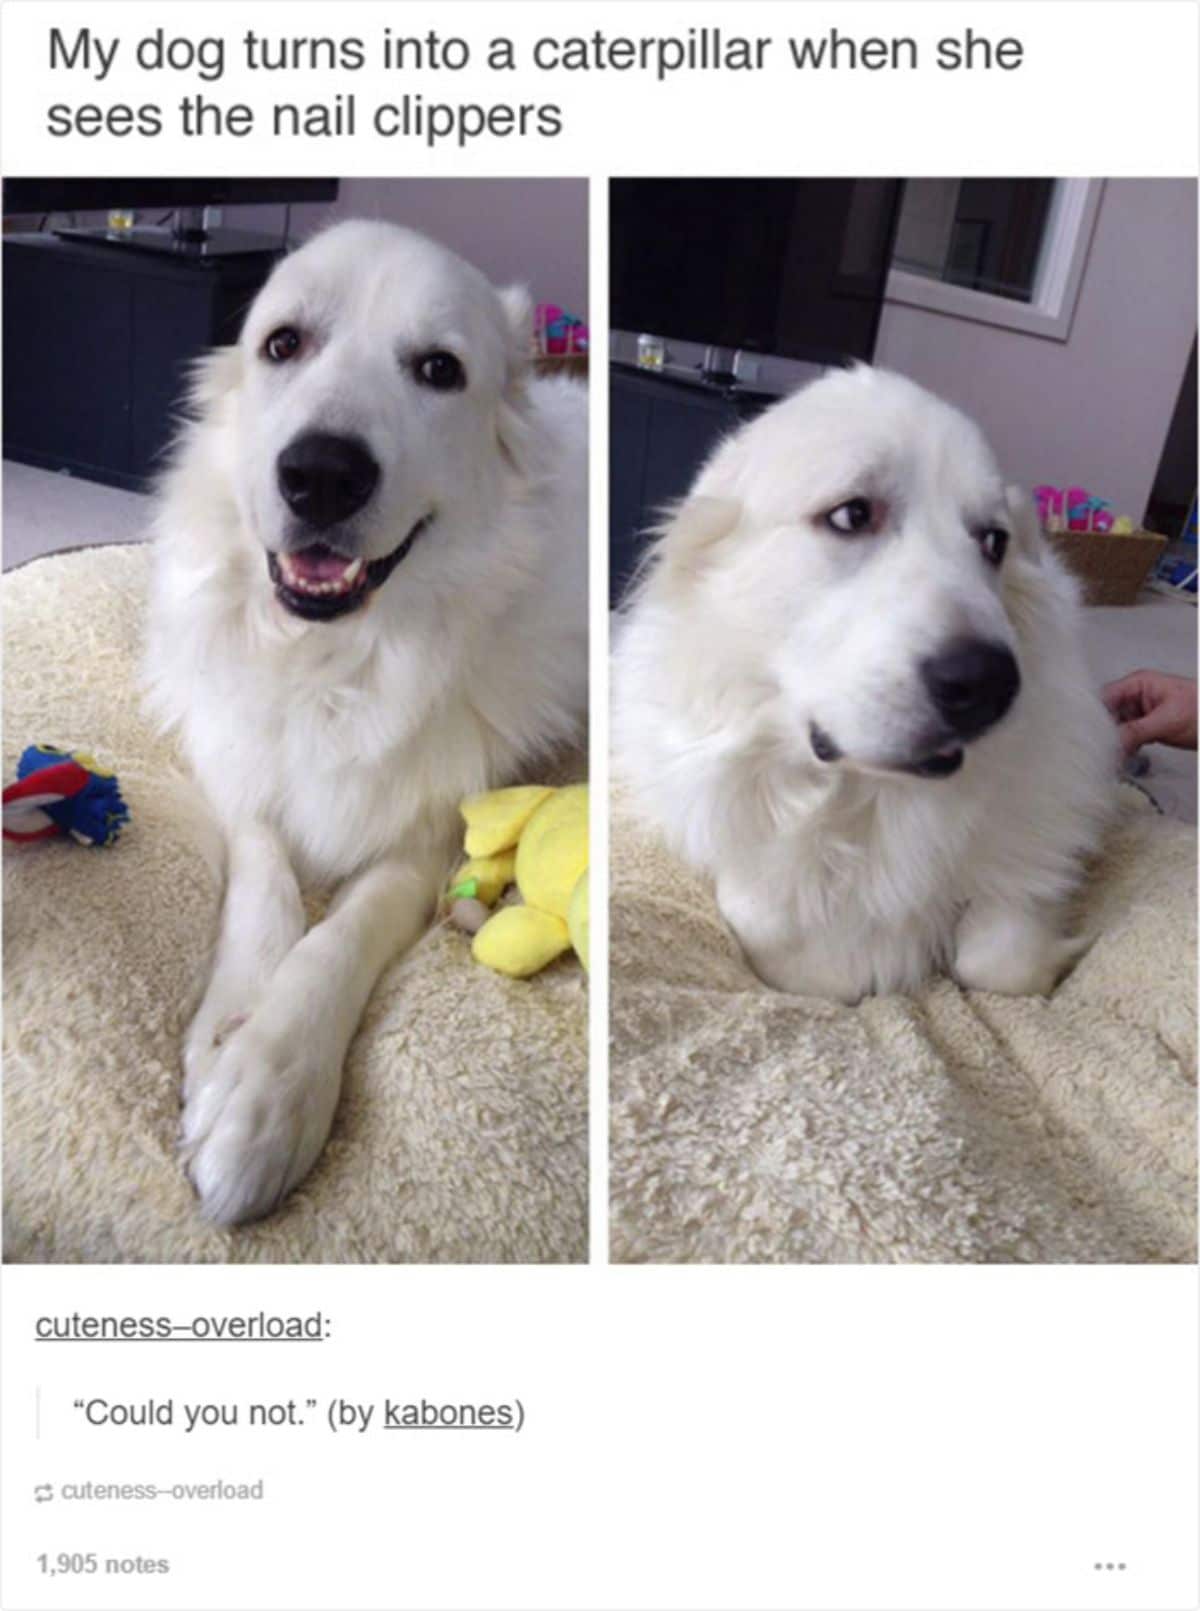 1 photo of a fluffy white dog laying on a white dog bed smiling and looking worried in the 2nd photo